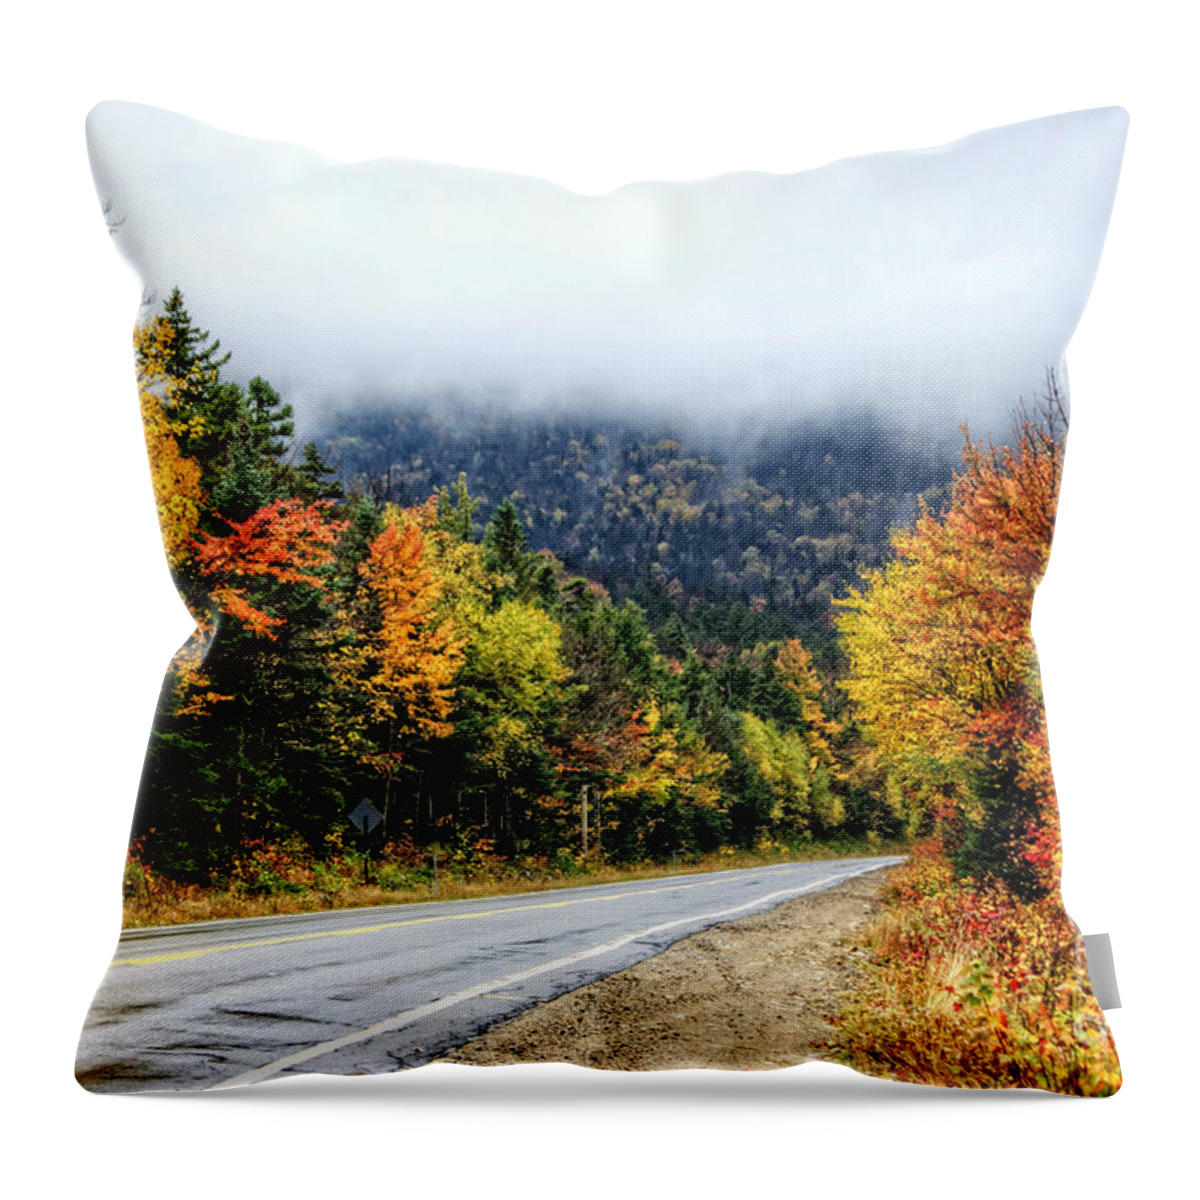 Road Throw Pillow featuring the photograph Road To The Clouds by David Birchall